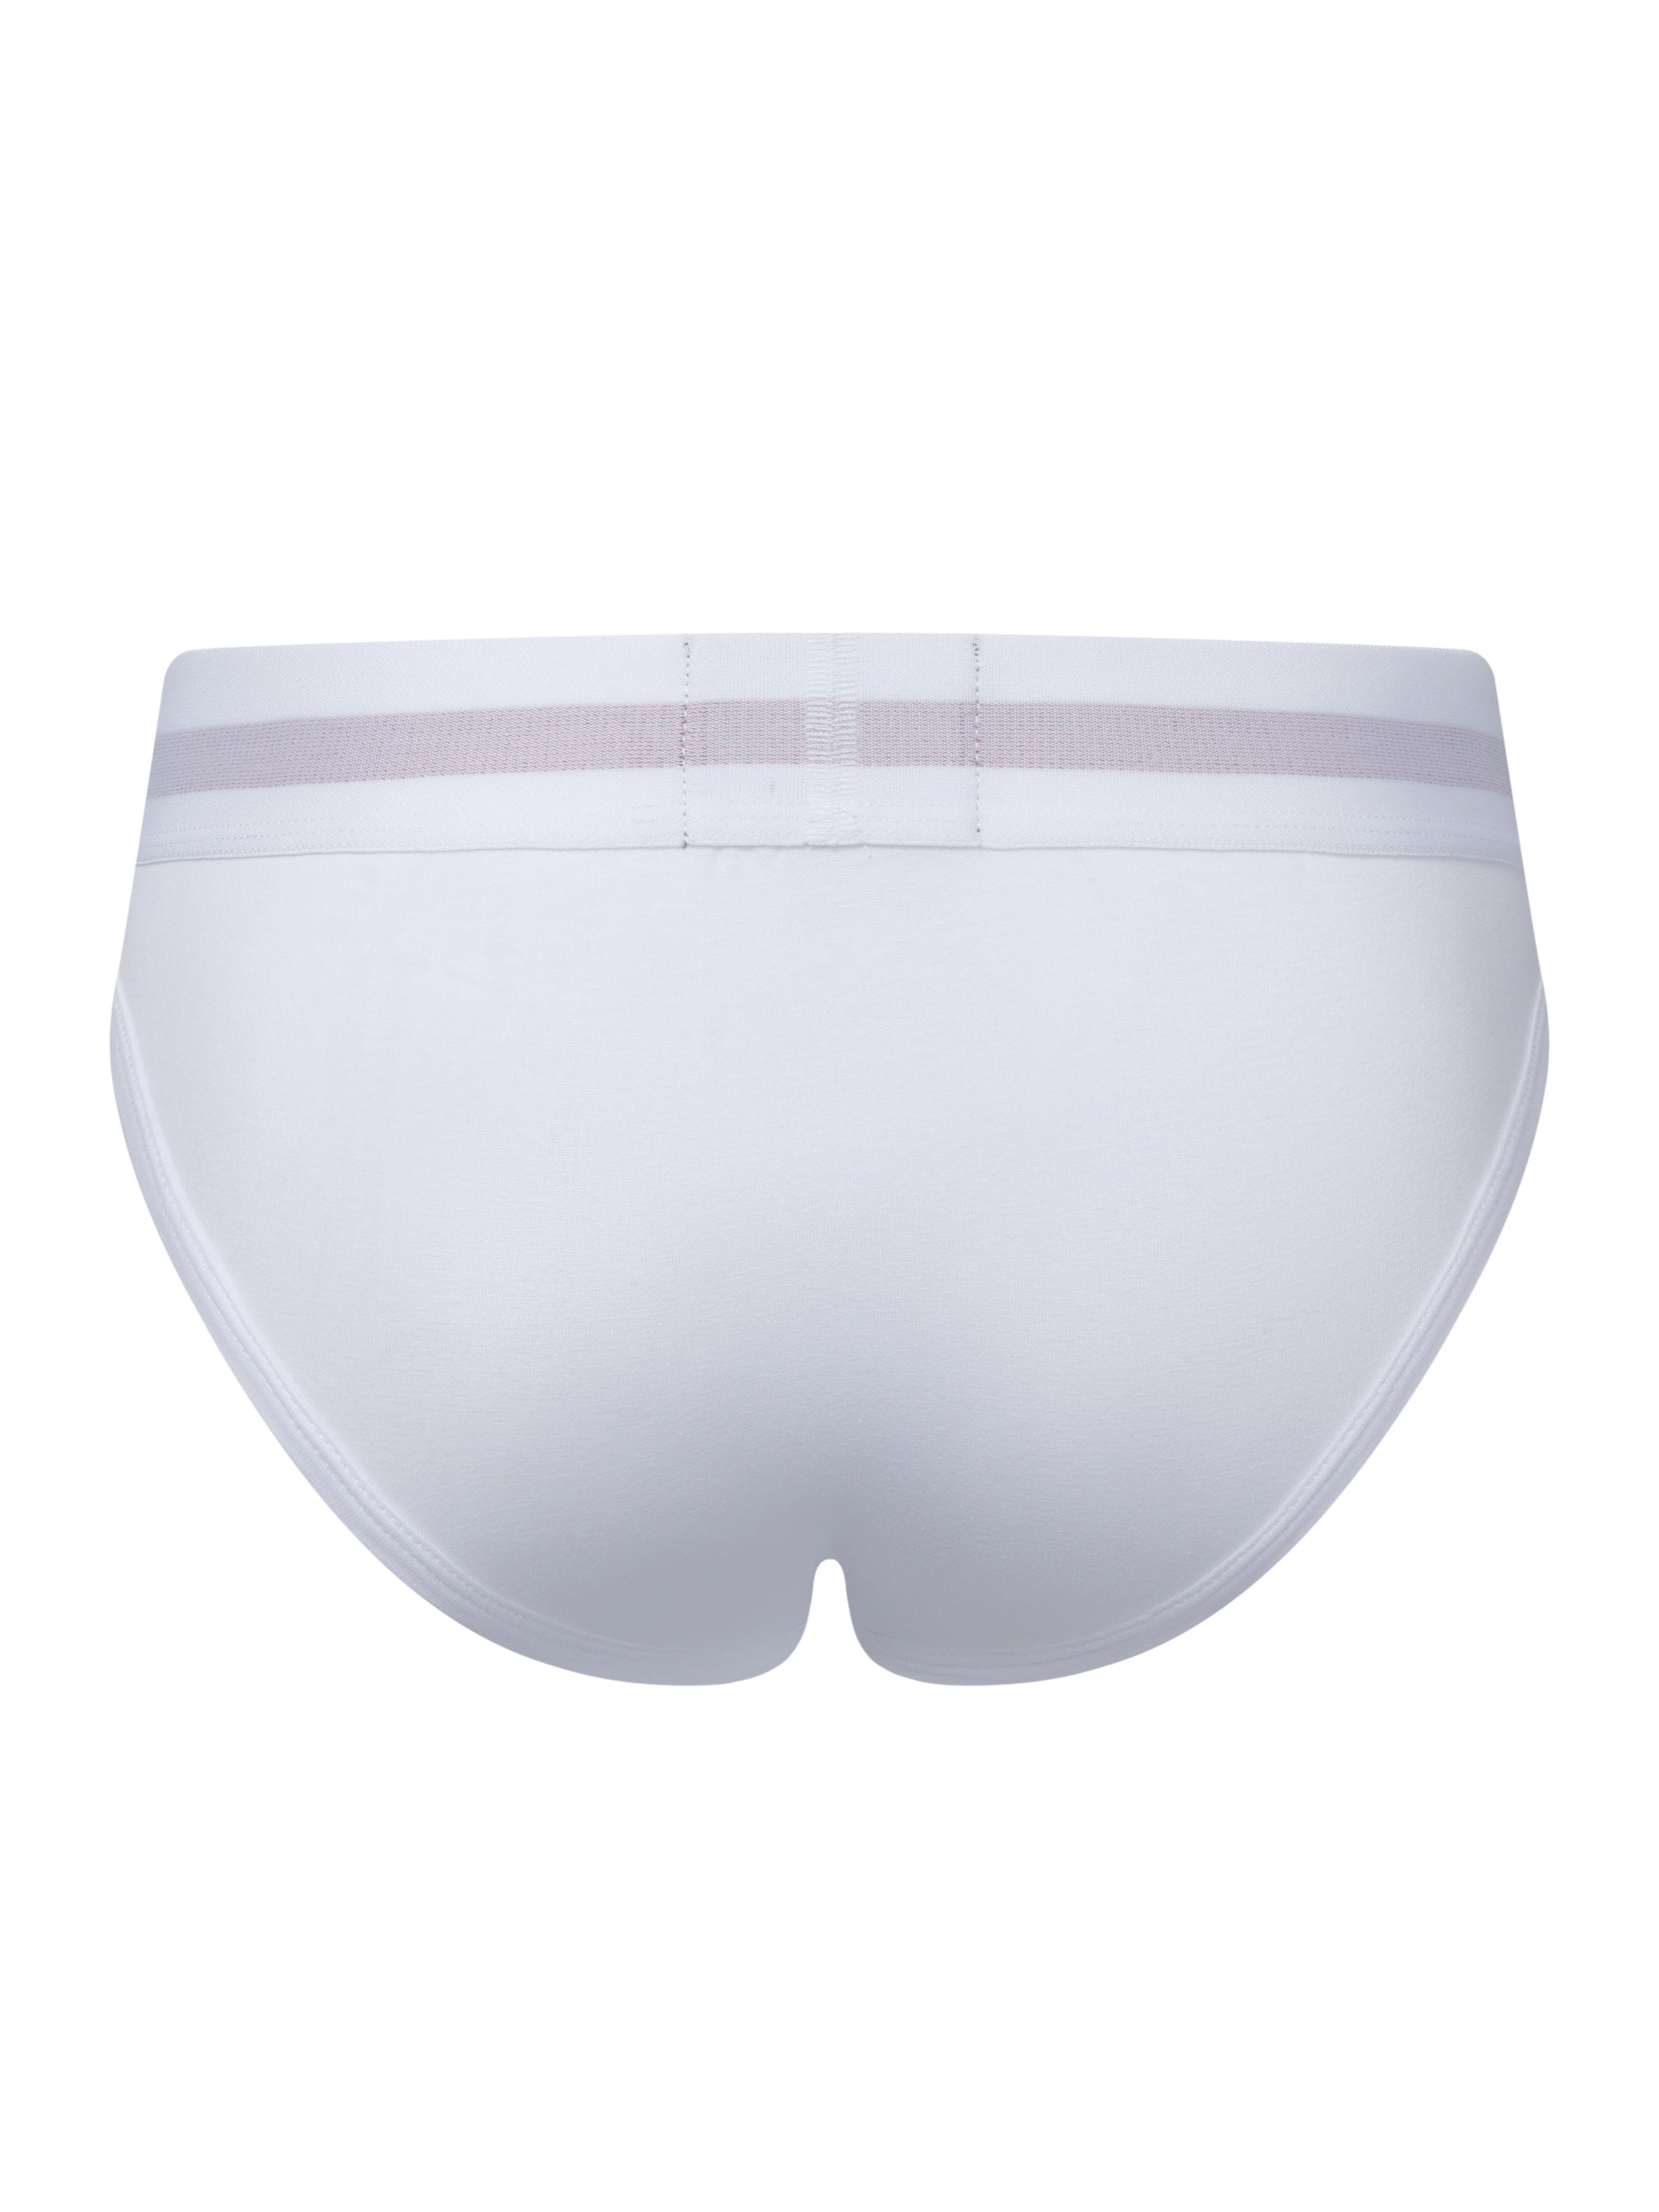 A Twisted Beast Insignia Brief in White from the back.